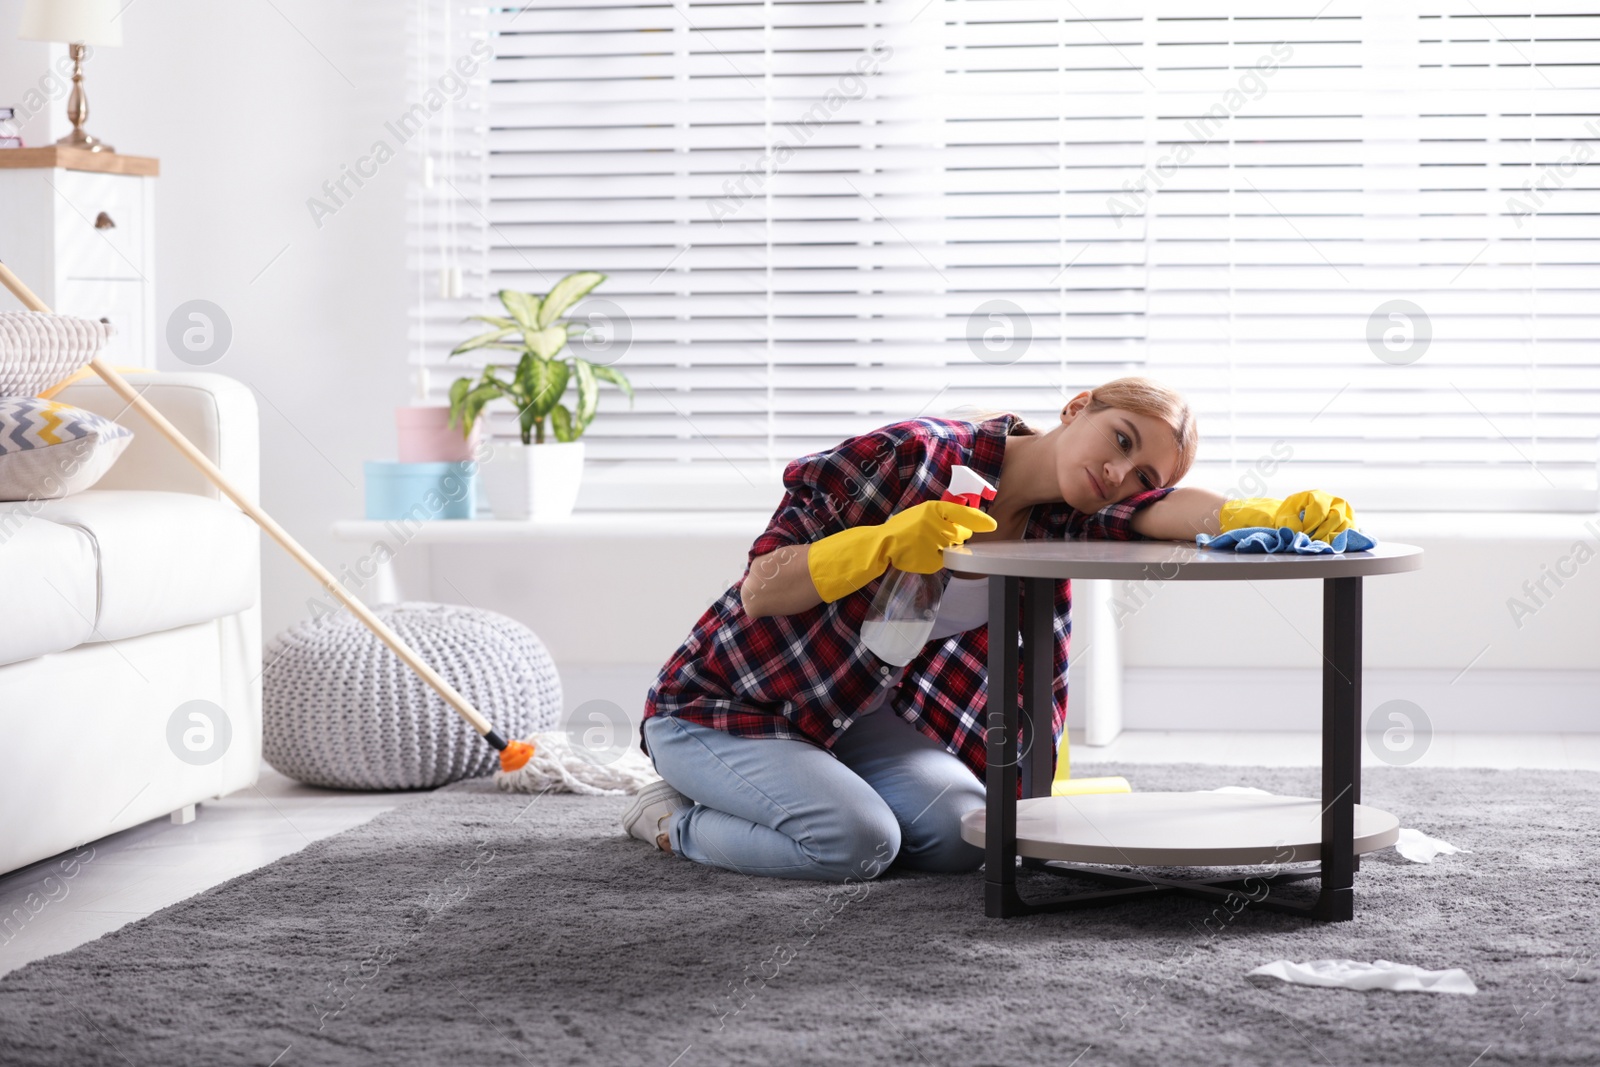 Photo of Lazy young woman wiping table at home. Cleaning and housework